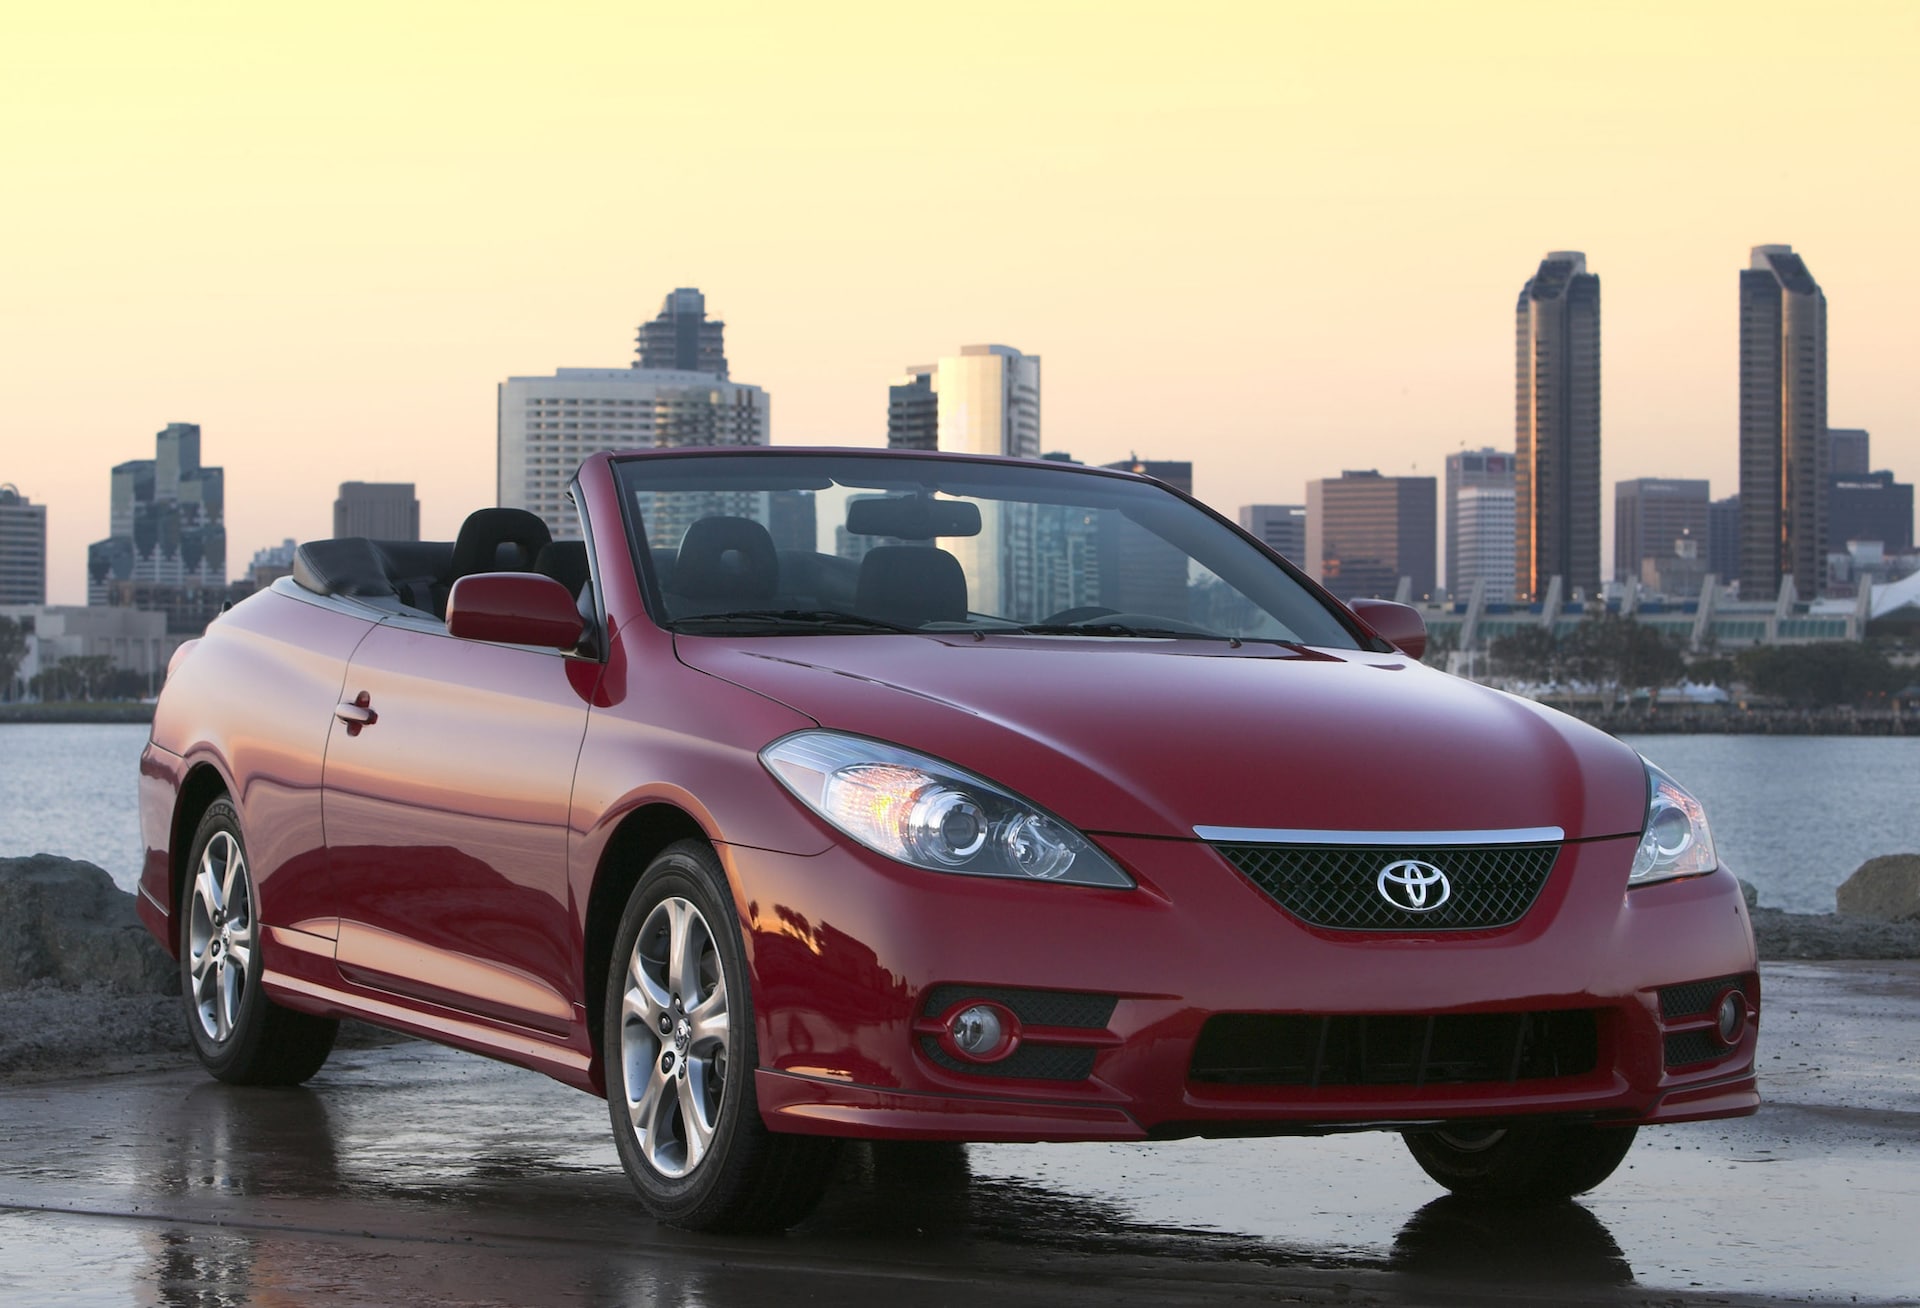 Solara Lives: Toyota will keep Camry-based convertible in production